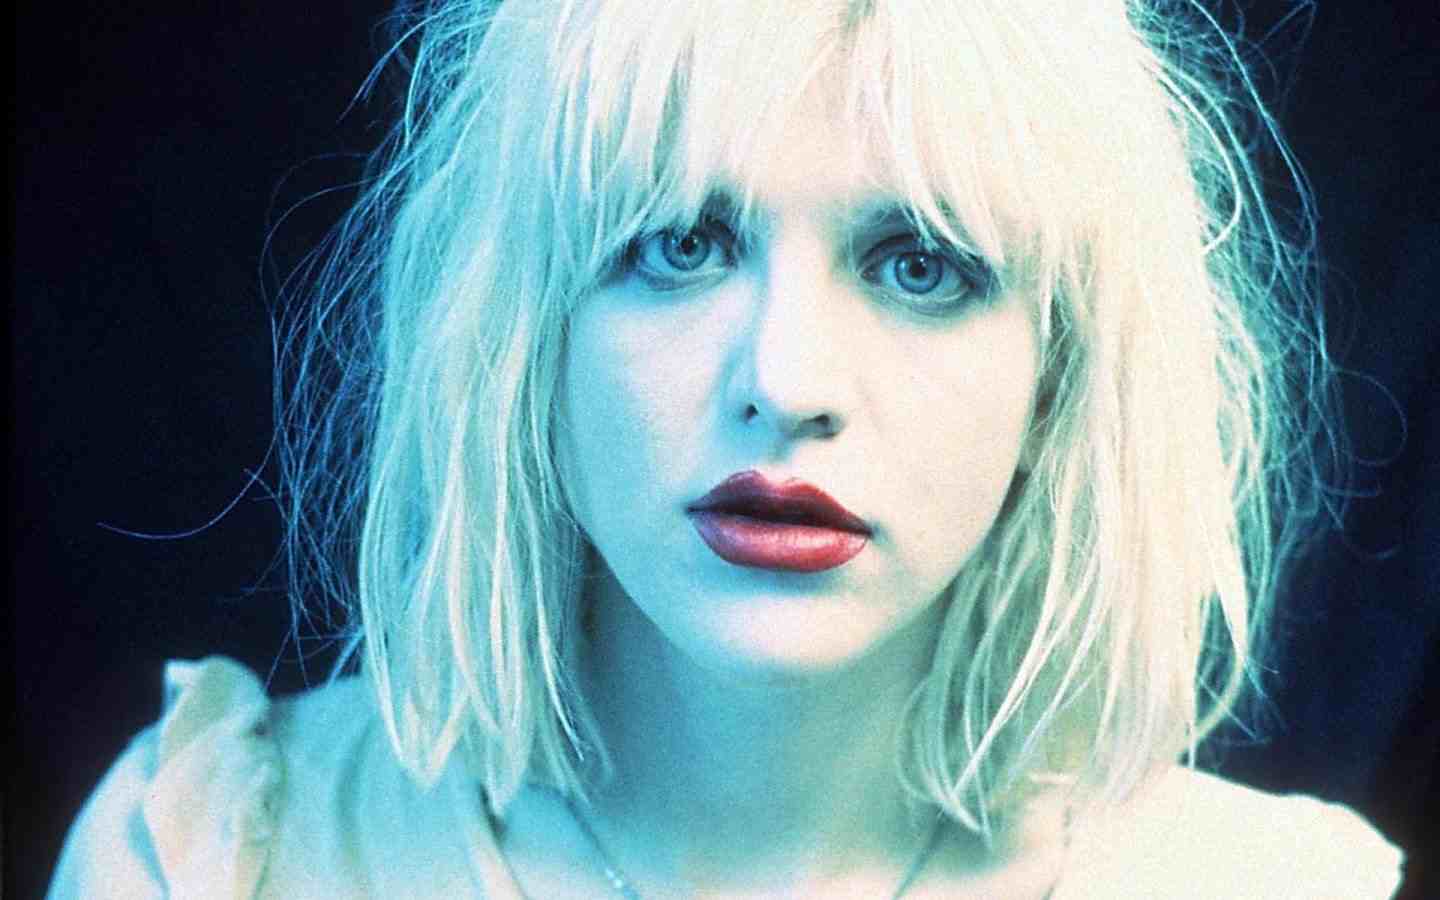 Courtney Love Joins The Lemonheads on Stage in London For Performance of ‘Into Your Arms’